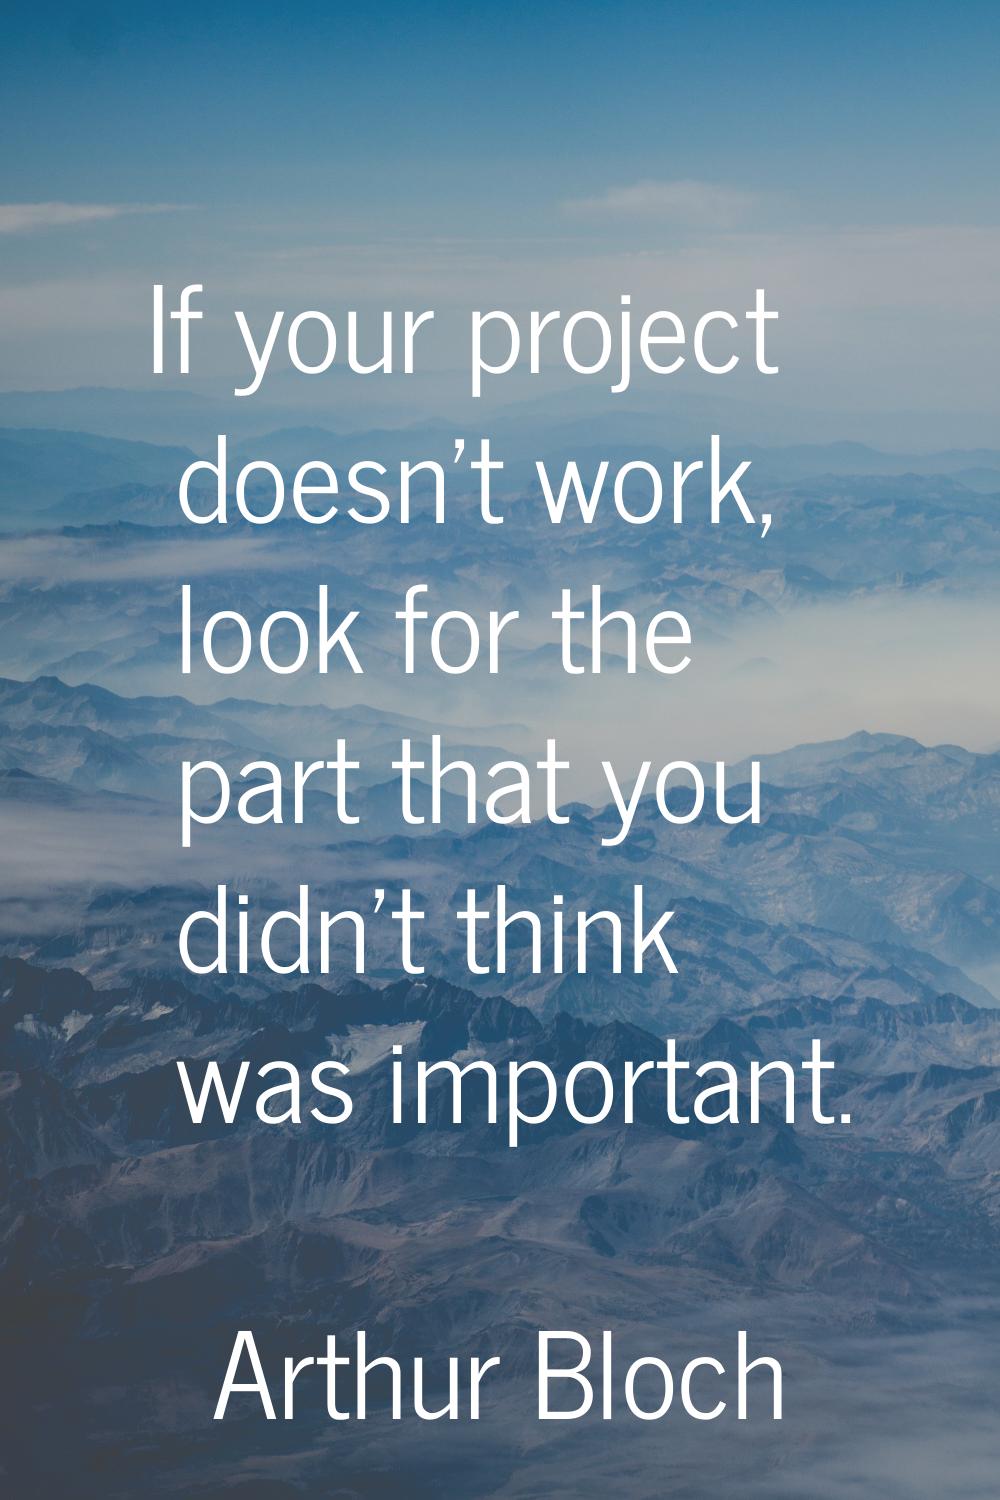 If your project doesn't work, look for the part that you didn't think was important.